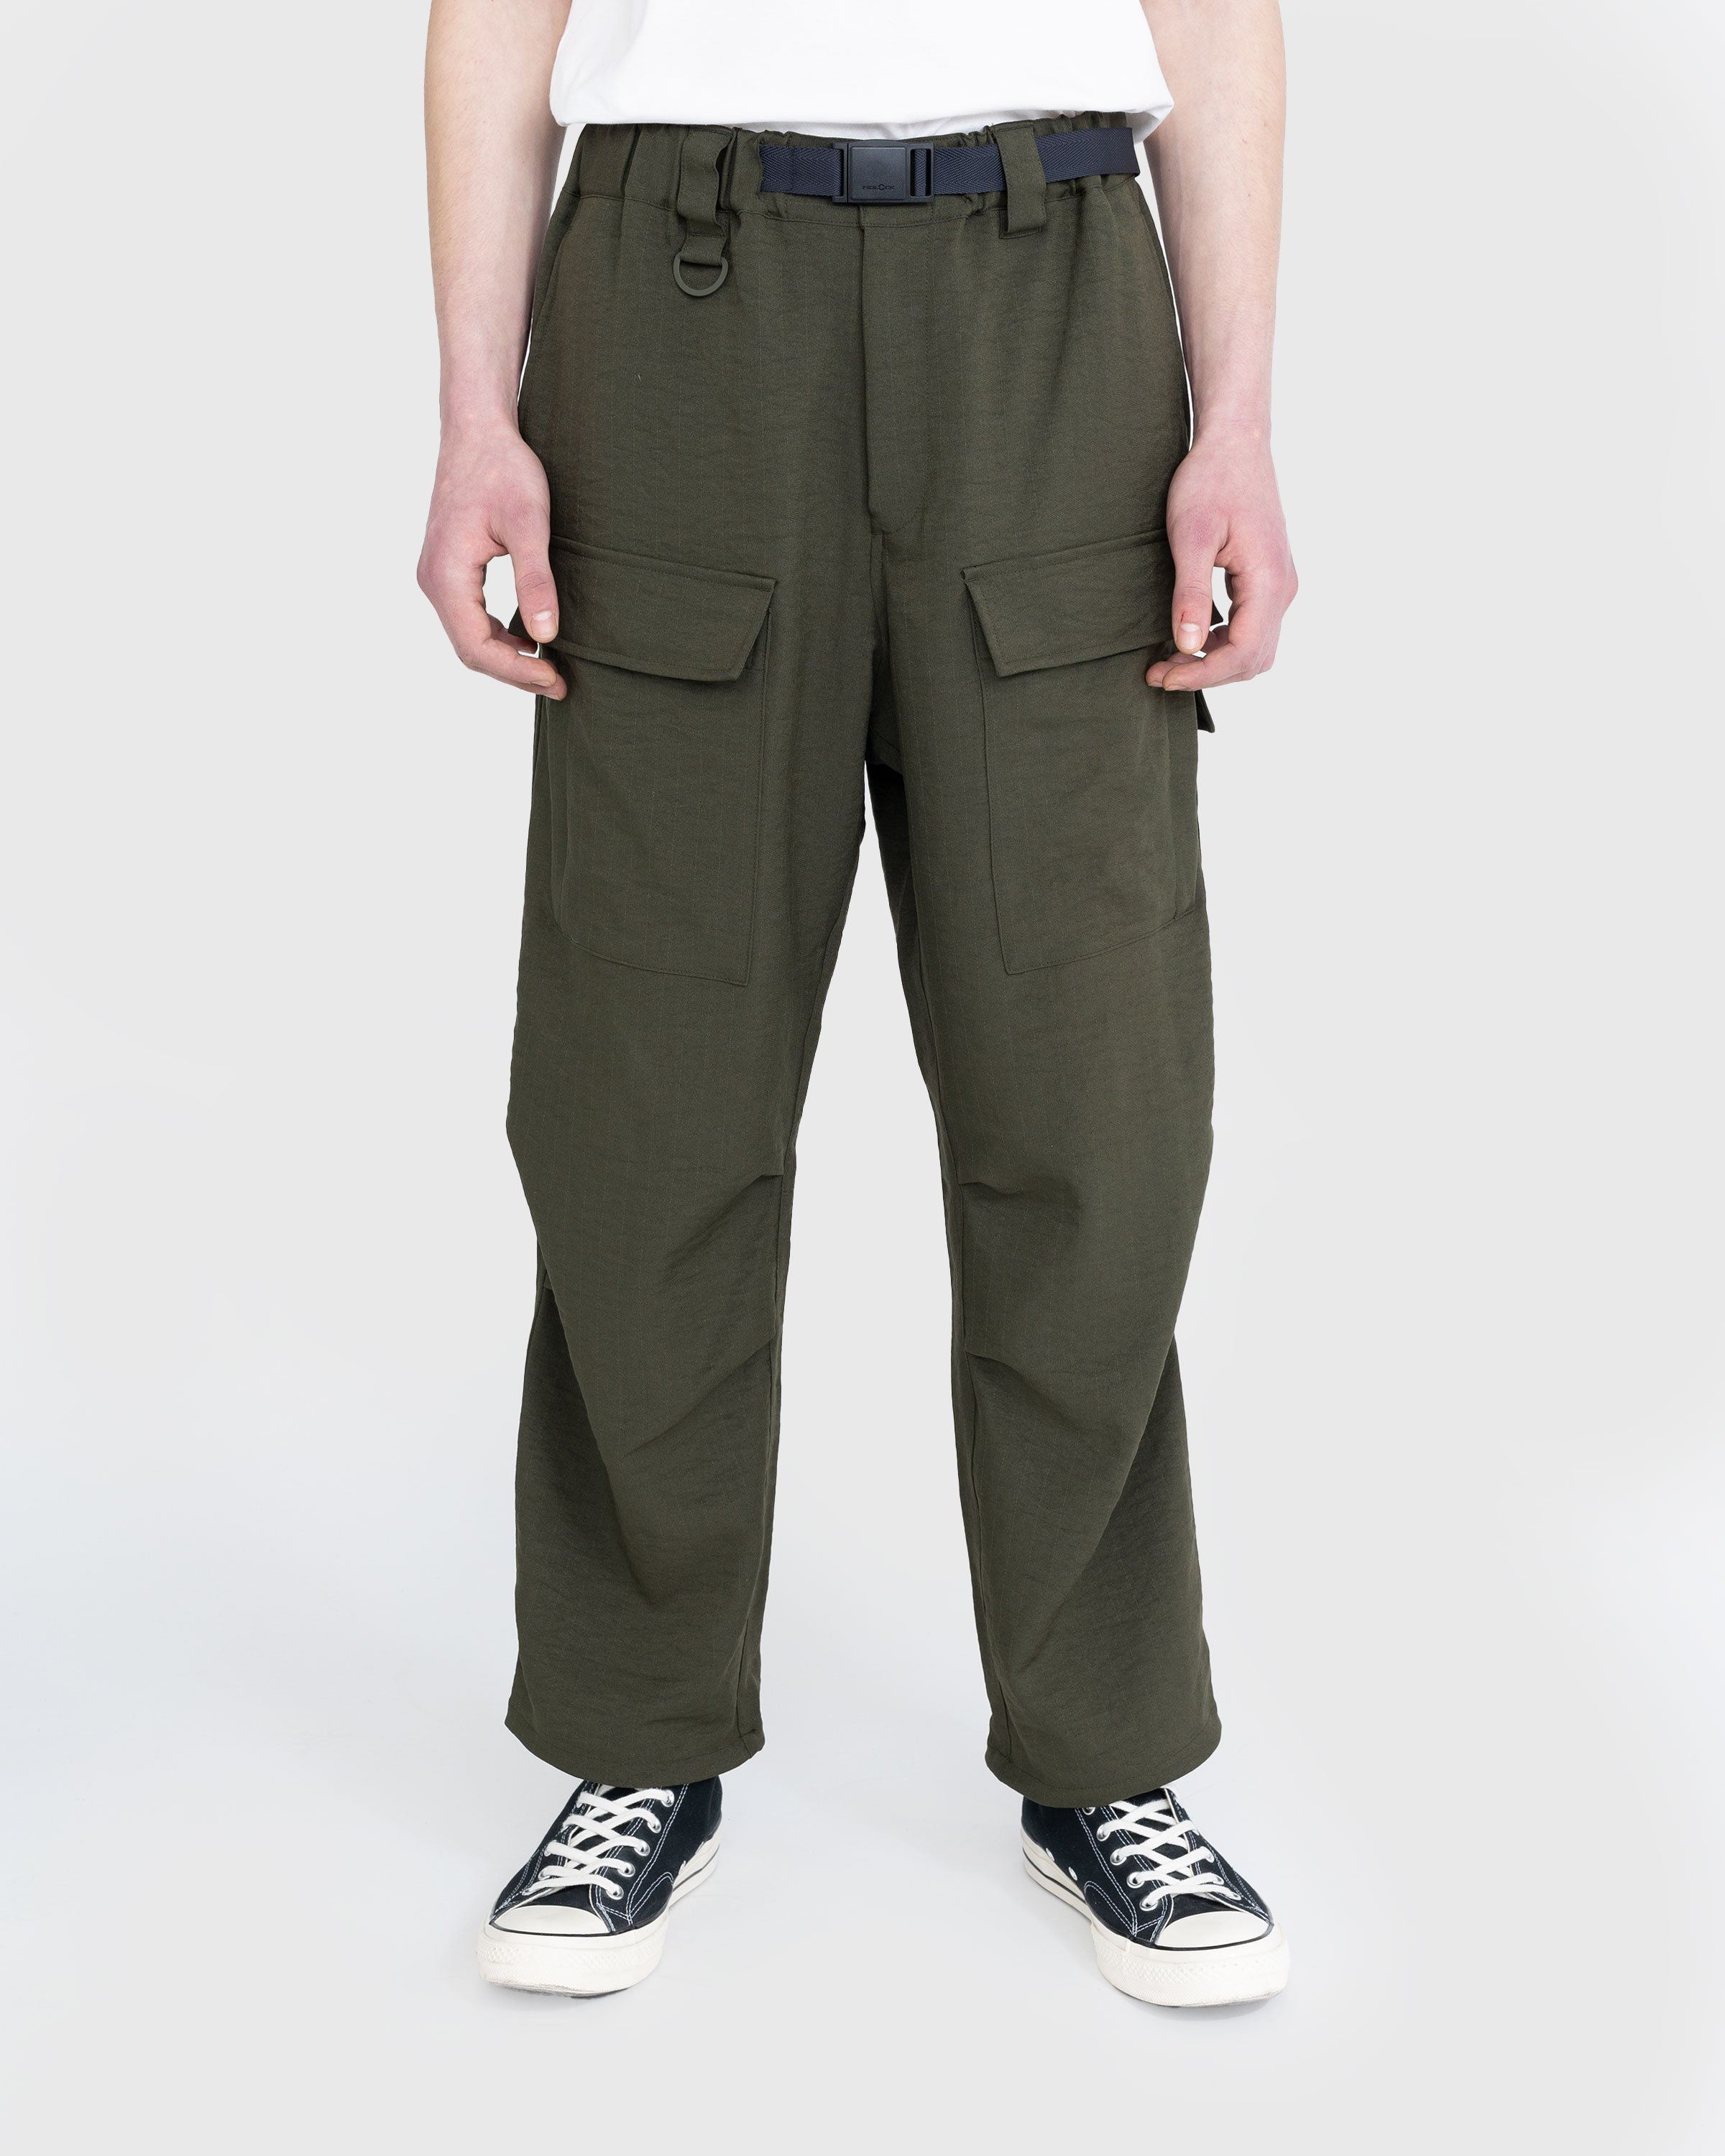 Y-3 - CL SL Cargo Pants - Clothing - Green - Image 2